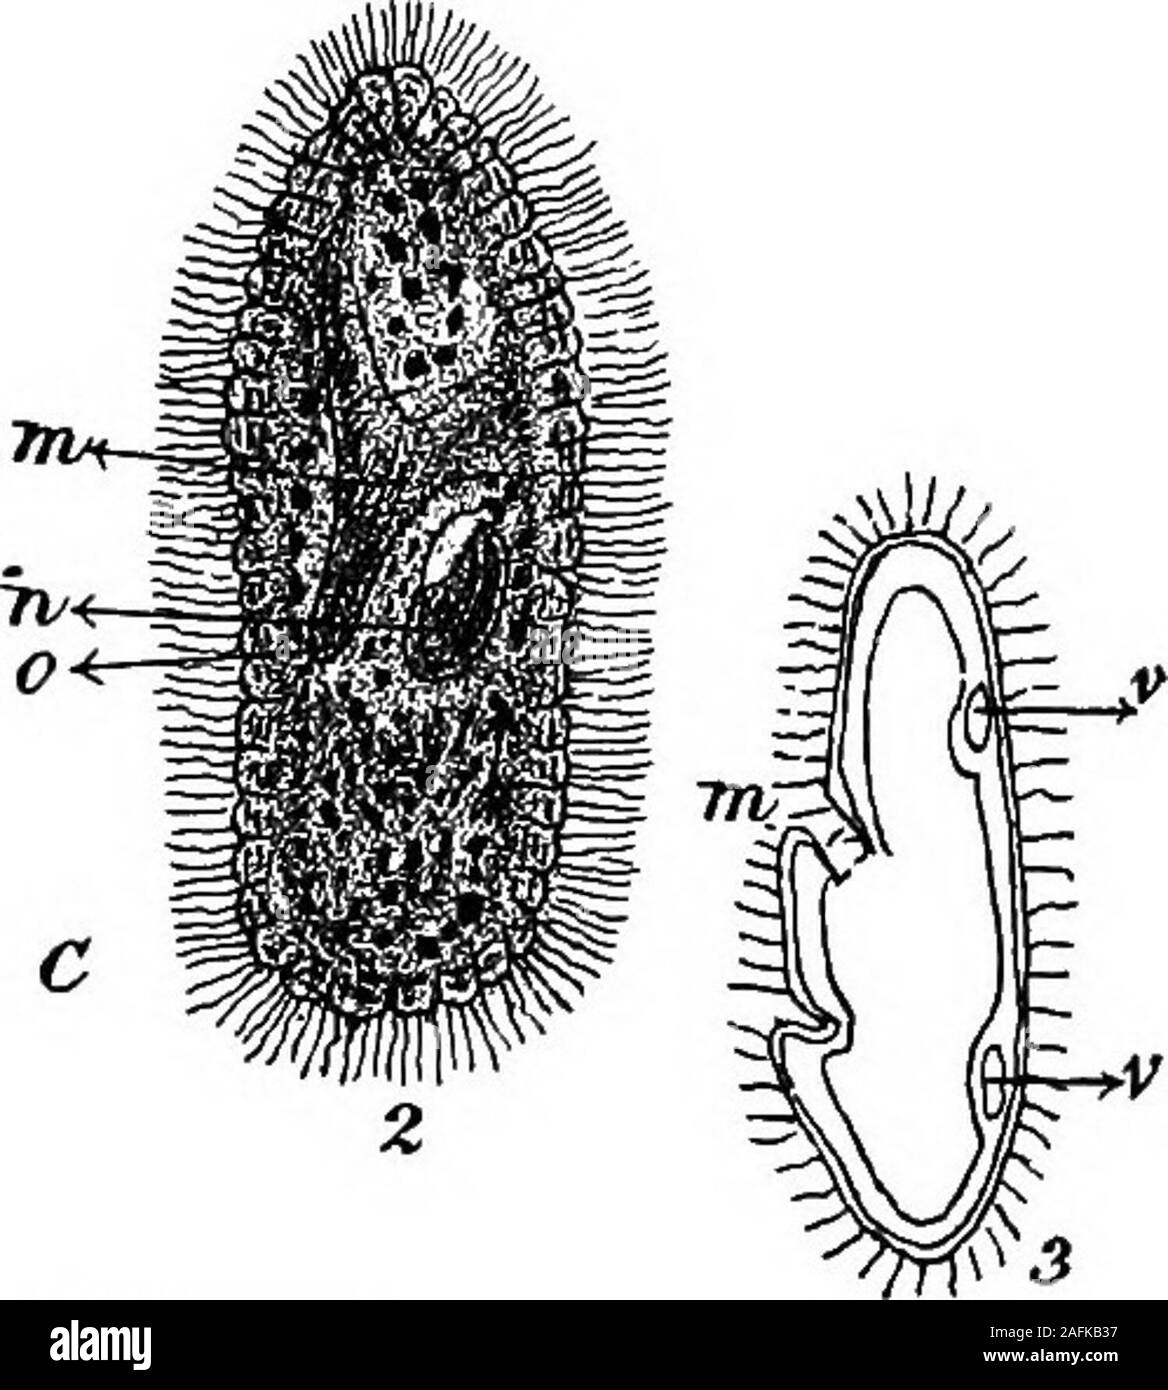 . The physiology of the Invertebrata. Fig. 3.—Types of Infusoria. Representing the Flagellata, the Tentaculifera, and the Ciliata. A = Noctiluca. B = Acineta. C i = Vorticella. C 2 and 3 = Paramoecium. Gv = Gastric vacuole. F = Flagellum. i = Tentacles, n = Nucleus. V = Contractile vacuole, m = Mouth. 0 = (Esophagus. fixed to a pedicle their whole life. These organisms possesstentacula, or suckers, and are entirely different from theradiating pseudopodia of the Badiolaria. Each tentaculumis a tube (containing a granular fluid) which terminates PHYSIOLOGY OF THE INVERTEBRATA. 29 exteraally in a Stock Photo